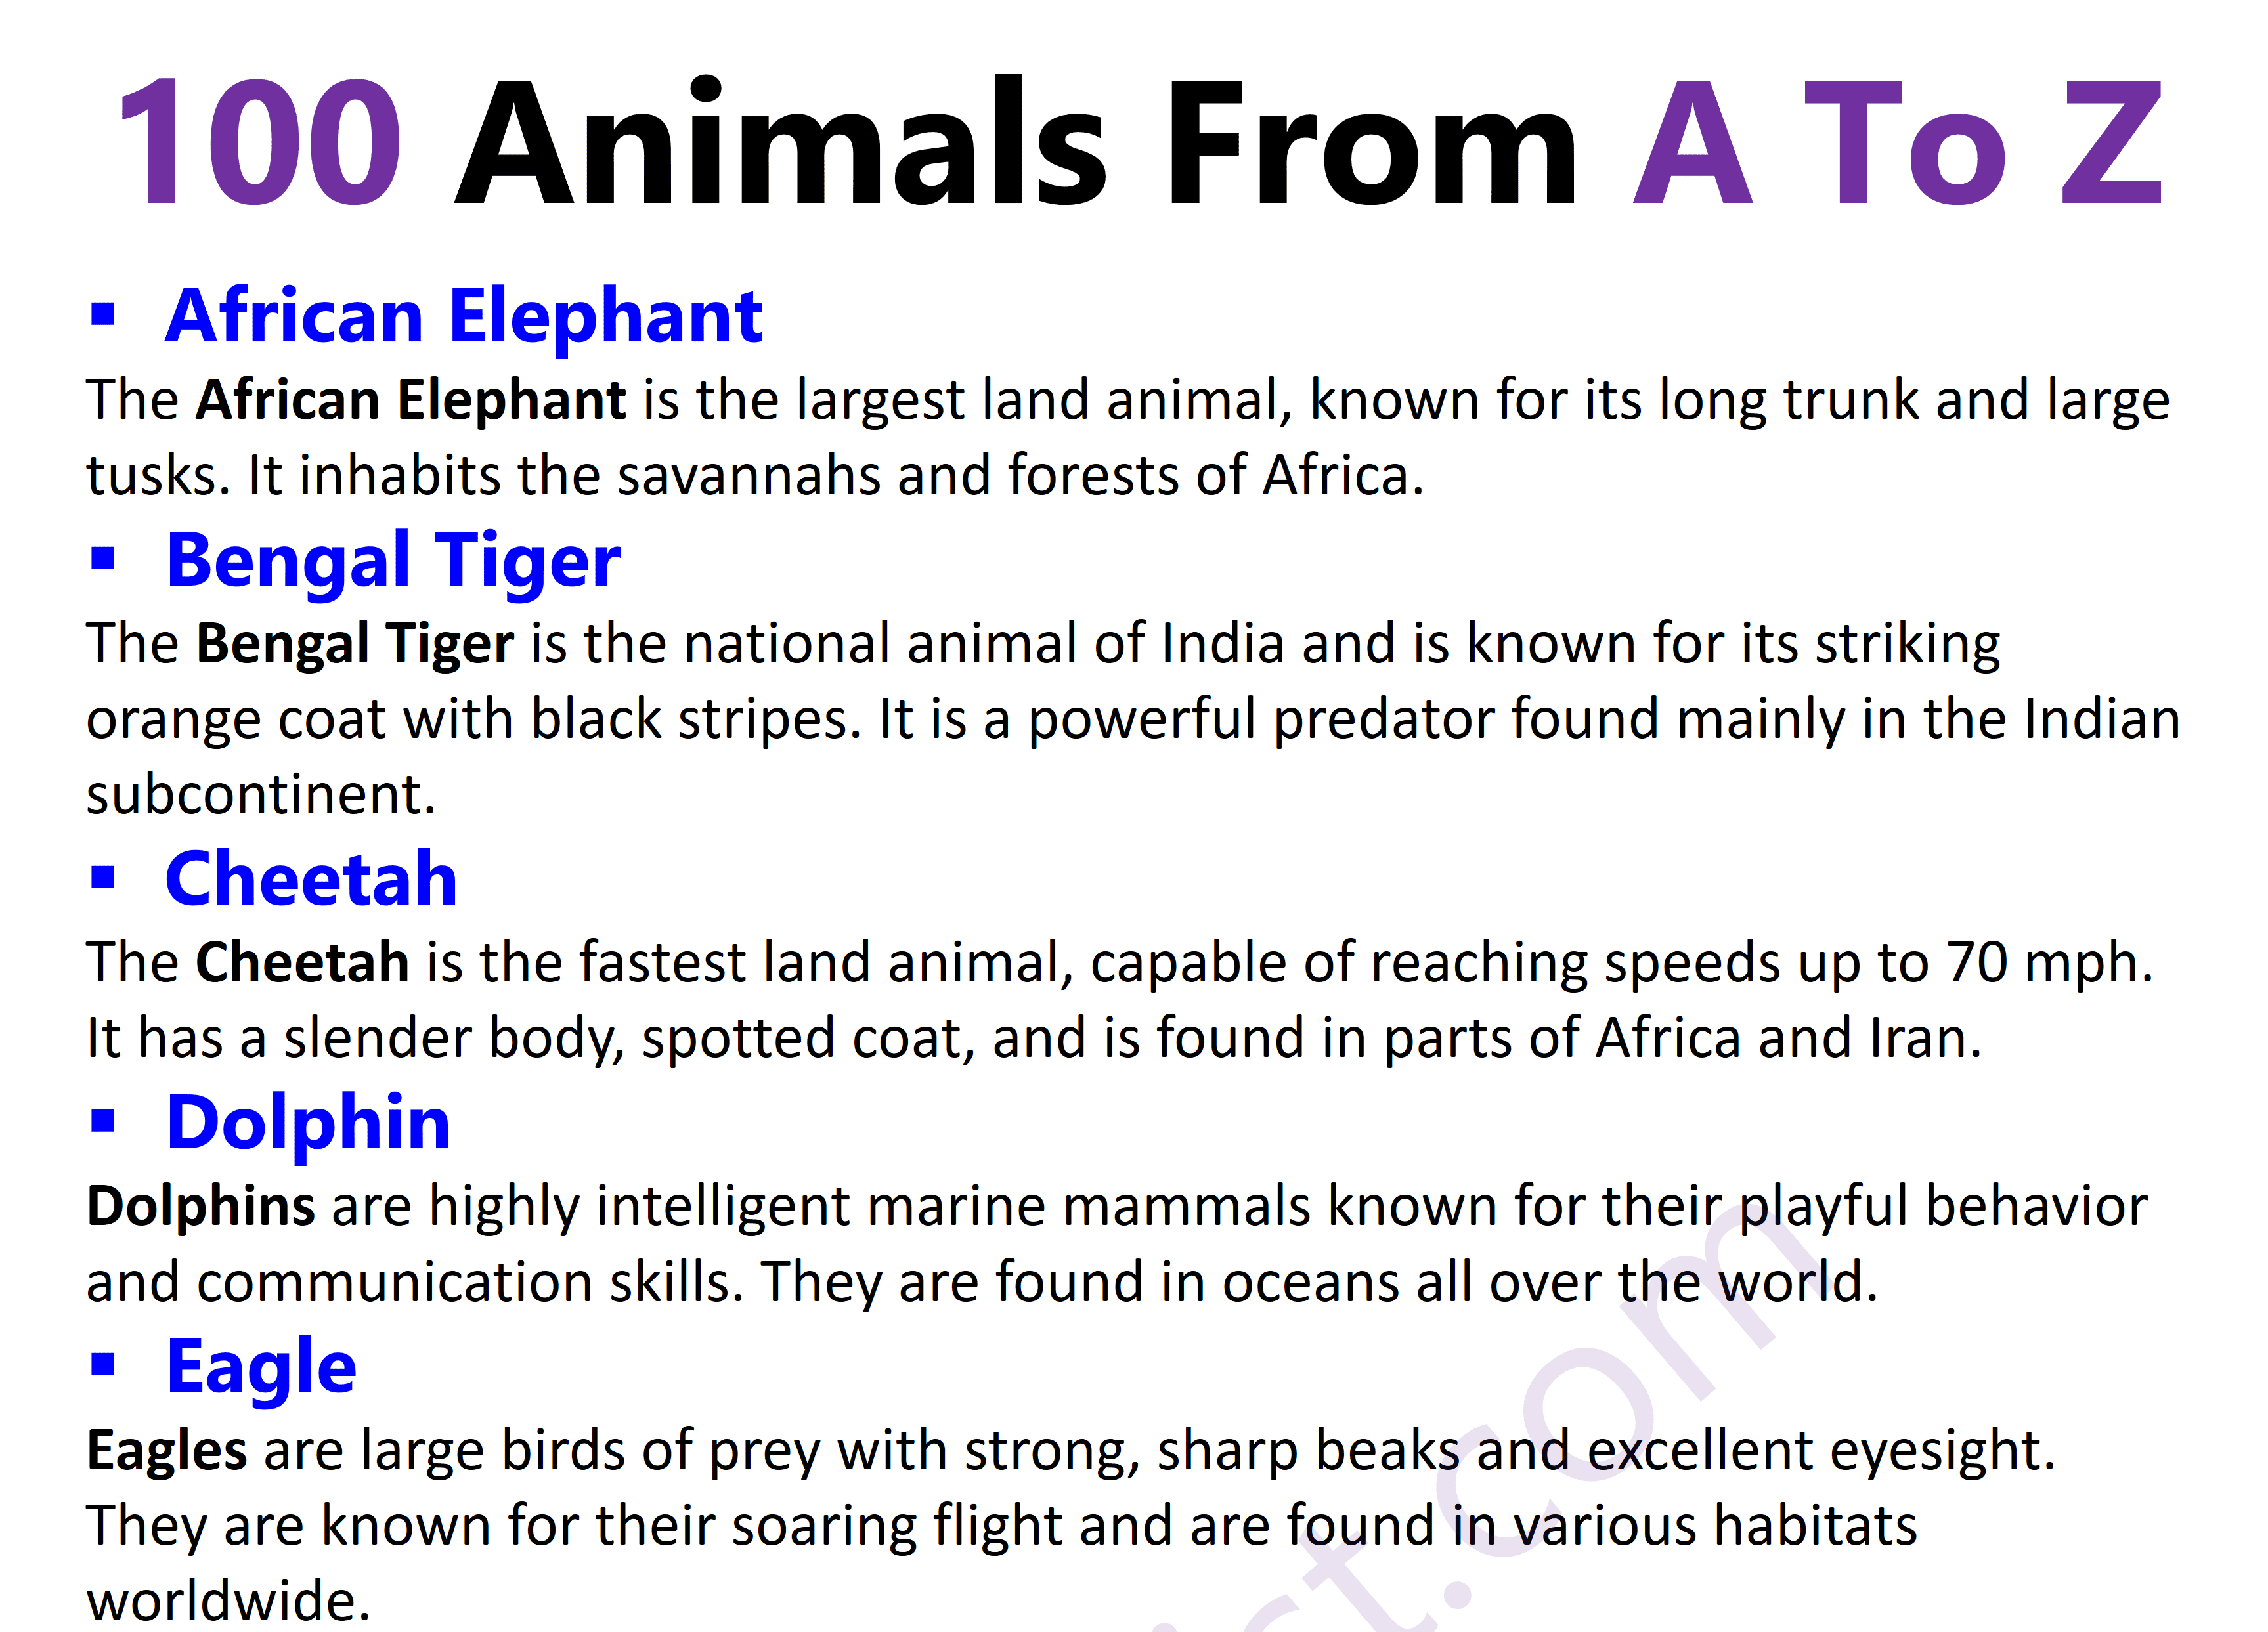 A Zoo of Wonders: 100 Fascinating Animals from A to Z